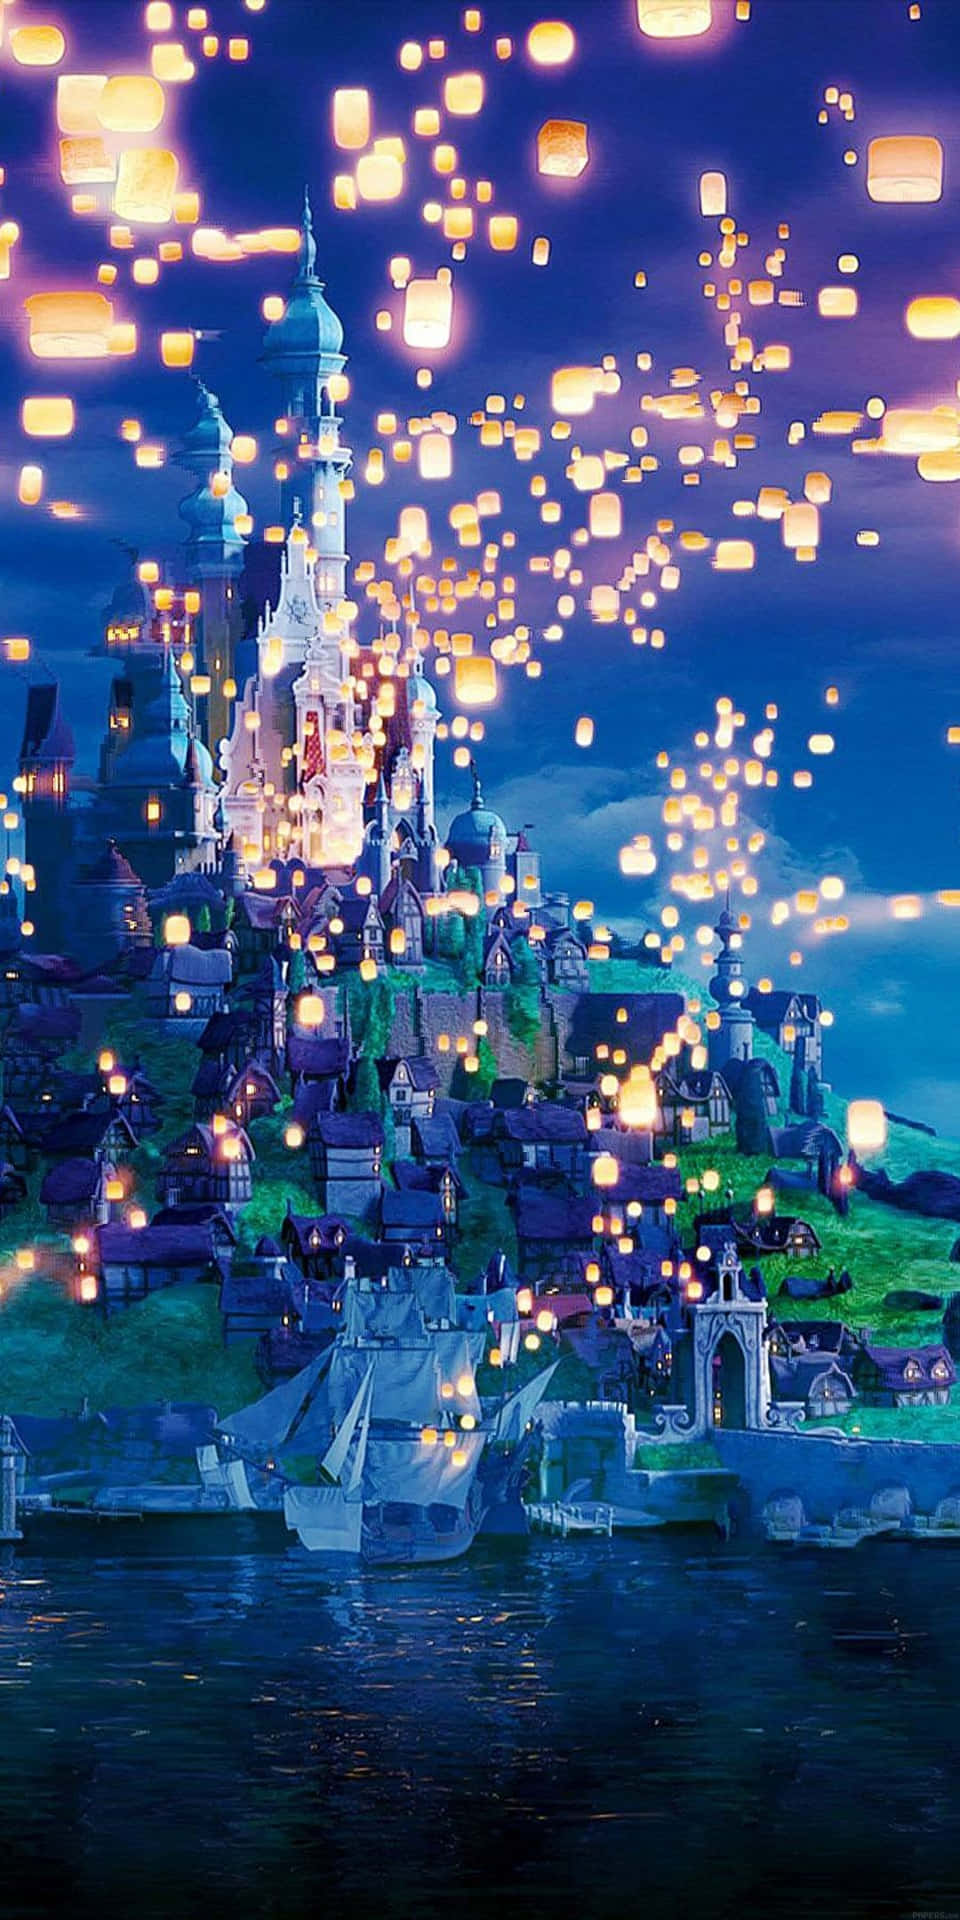 “Be Magical with the Disney Pixels 3”